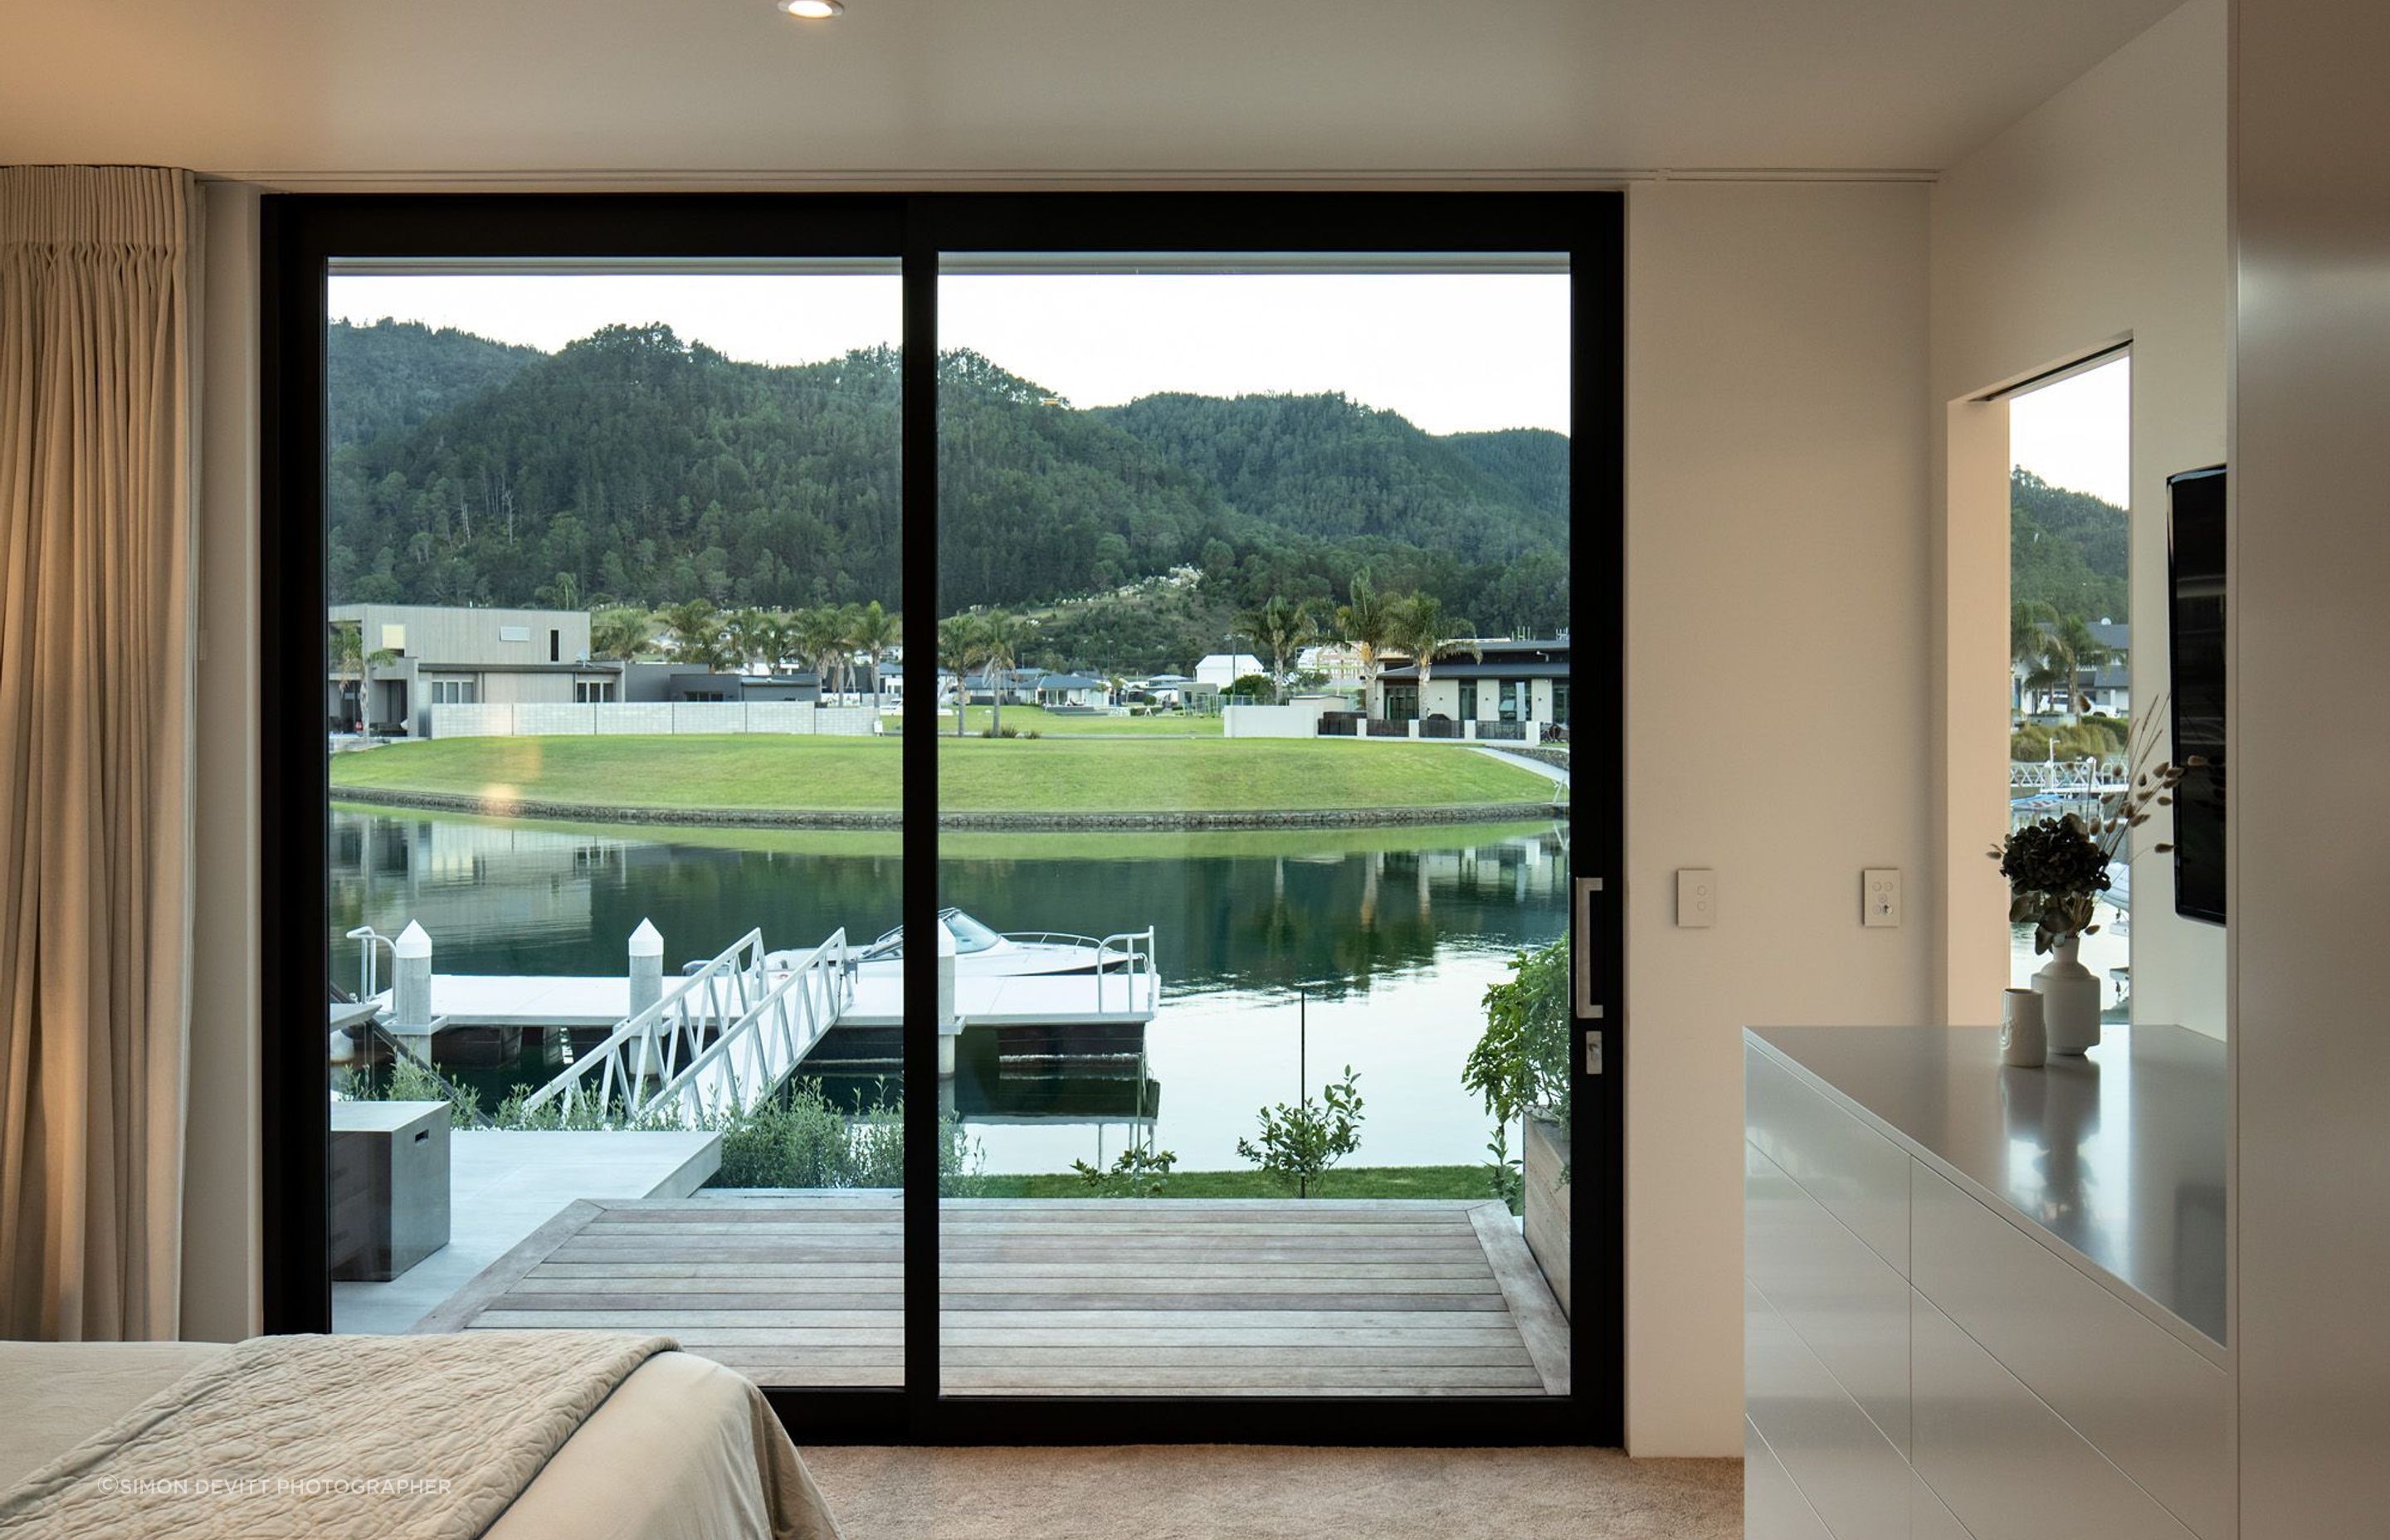 This master bedroom has a floor-to-ceiling view of the boat dock.